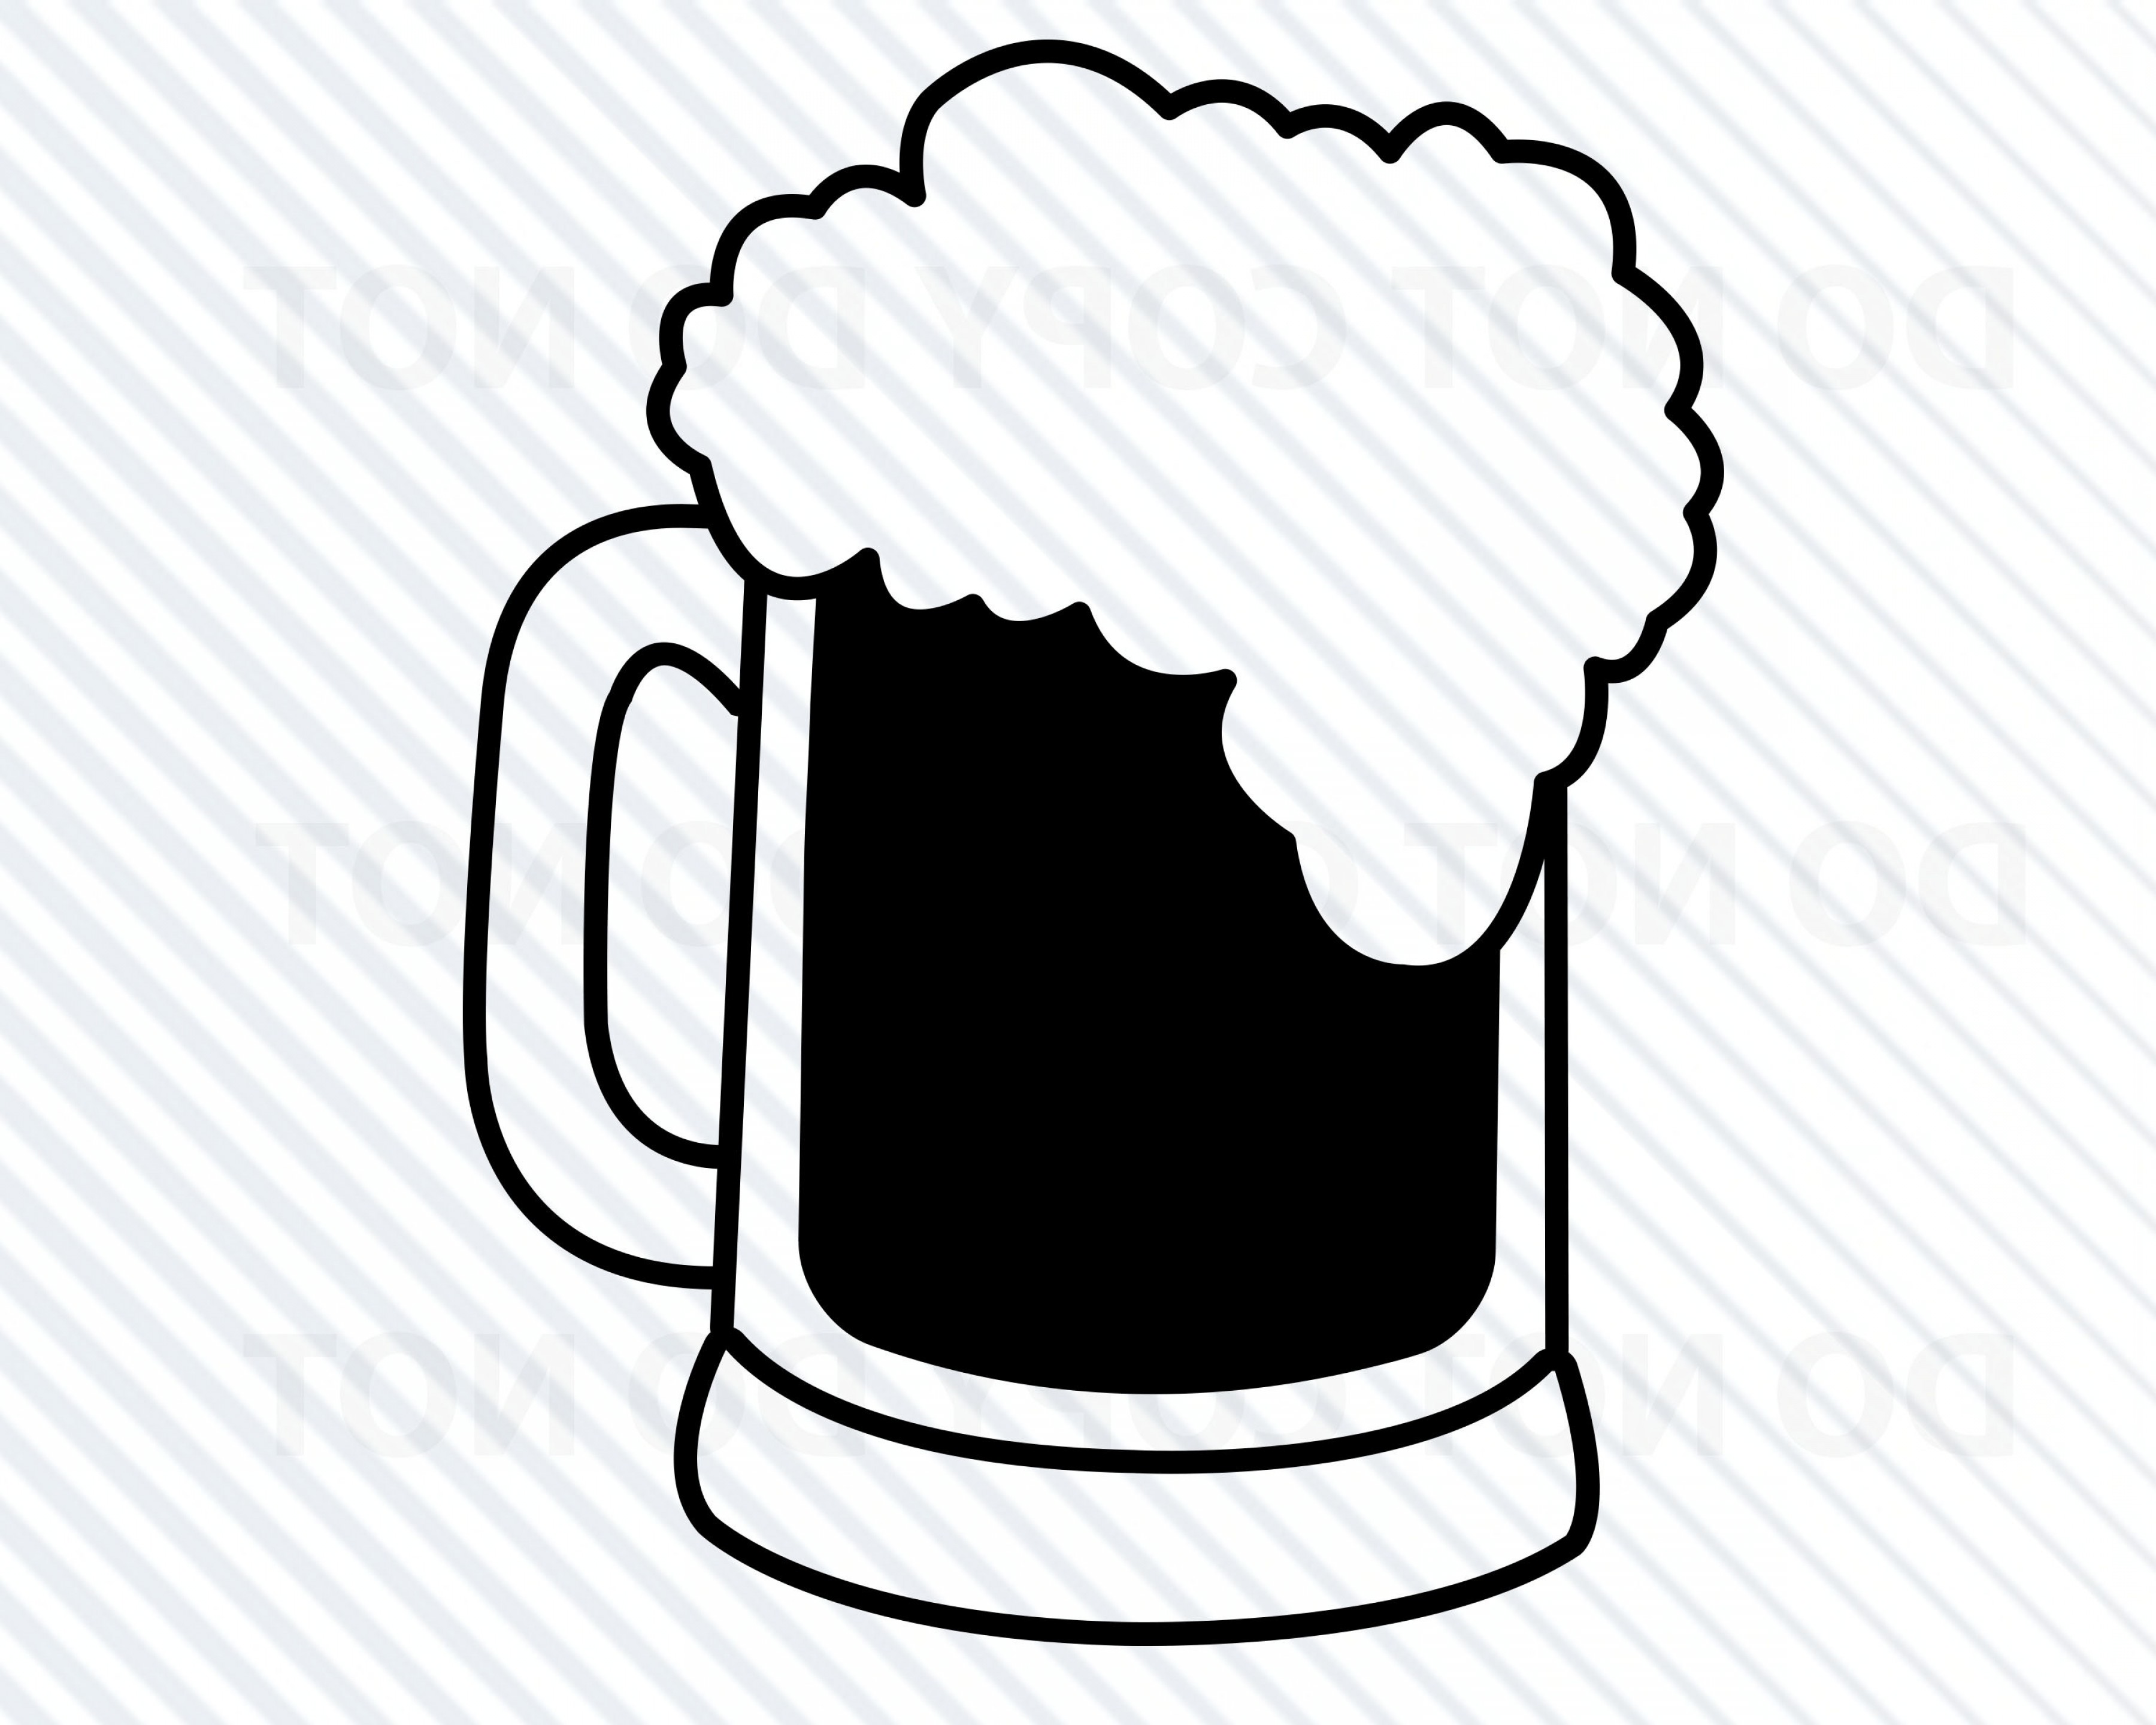 Download beer mug clipart for cricut 10 free Cliparts | Download ...